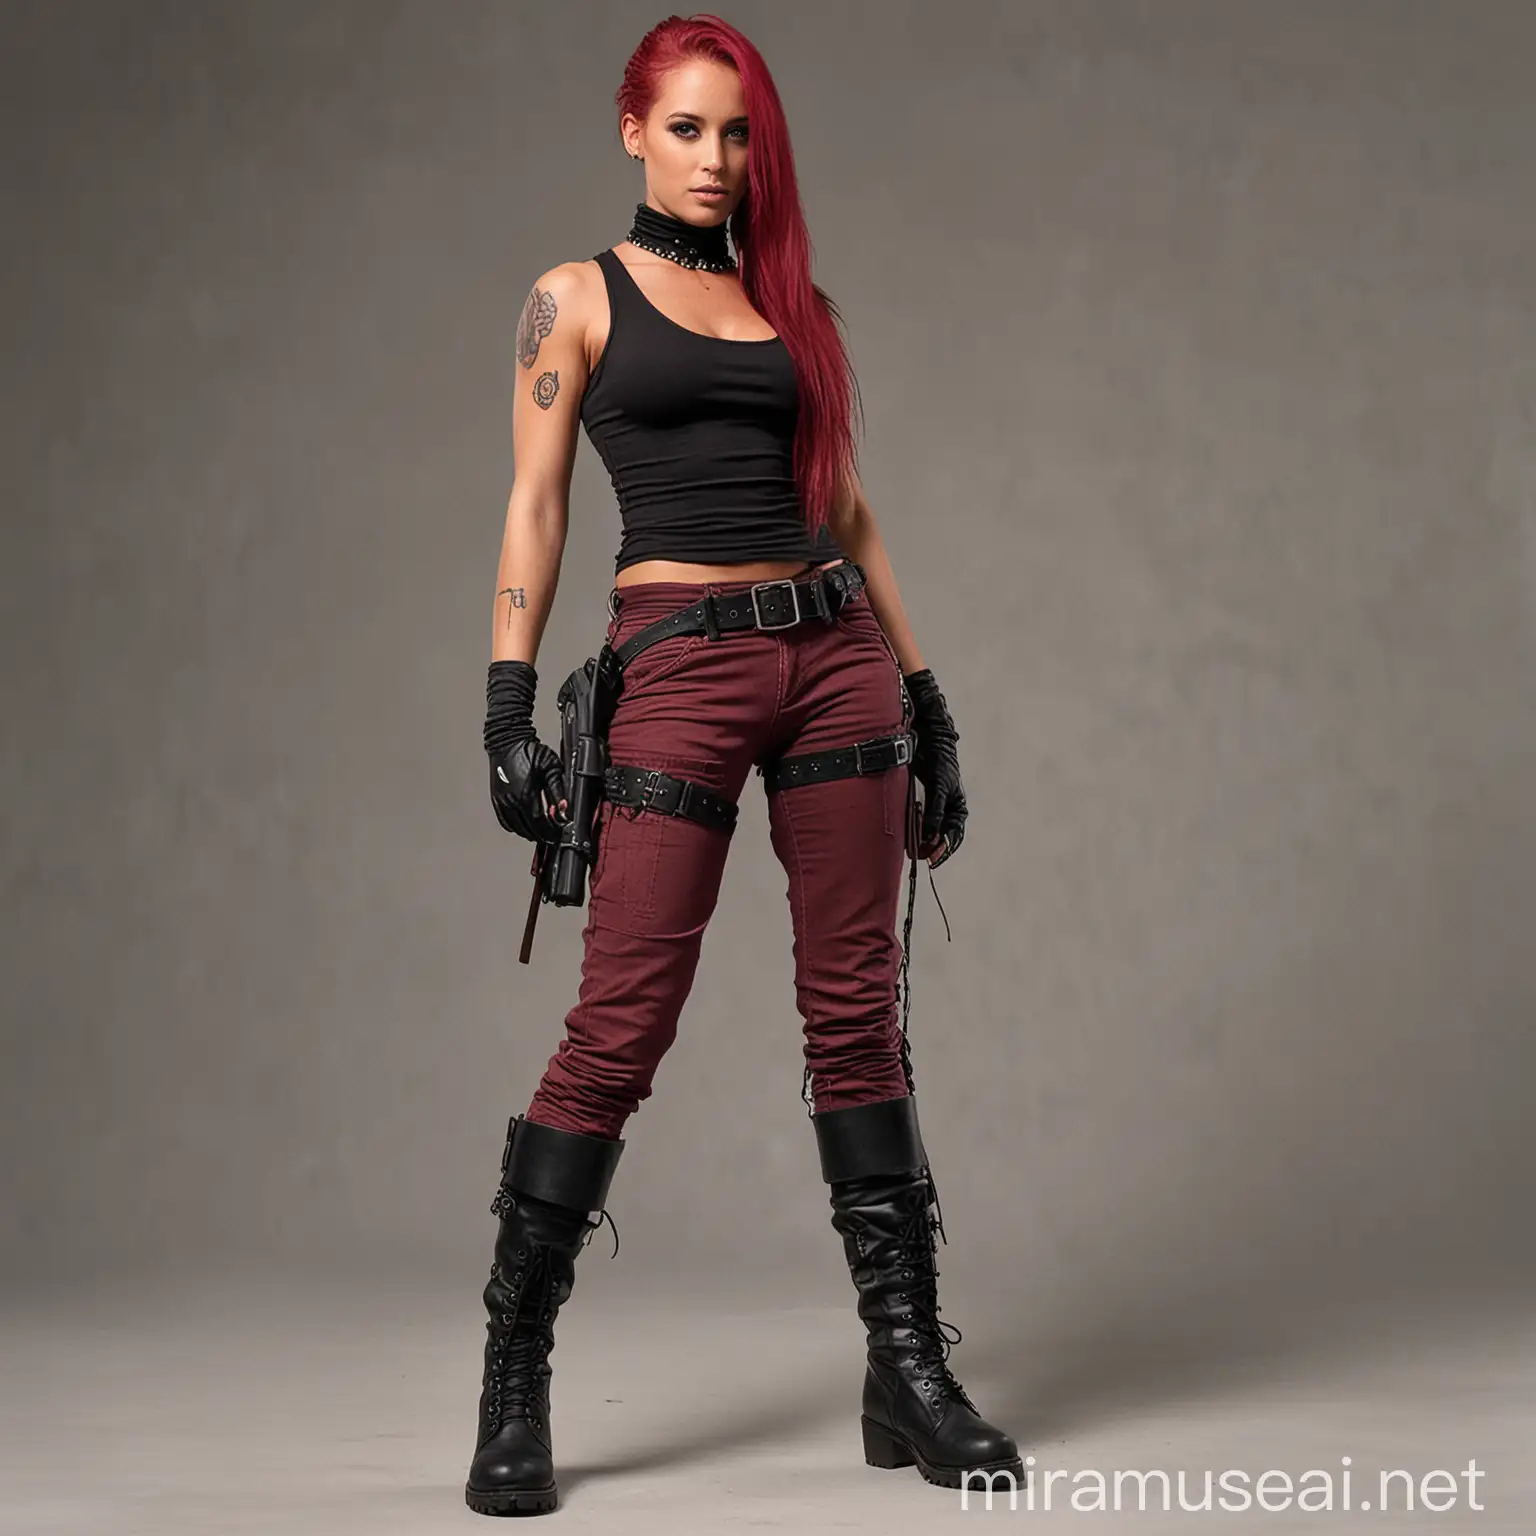 A woman in her 27s, had a long raspberry-colored hair tied back tanned skin. She has tanned skin and black eyes, wore a black tank top, fingerless gloves, worn burgundy pants with two holsters strapped to her thighs, knee high tactical boots and choker with a transparent crystal. She carries an charismatic and malicious aura.